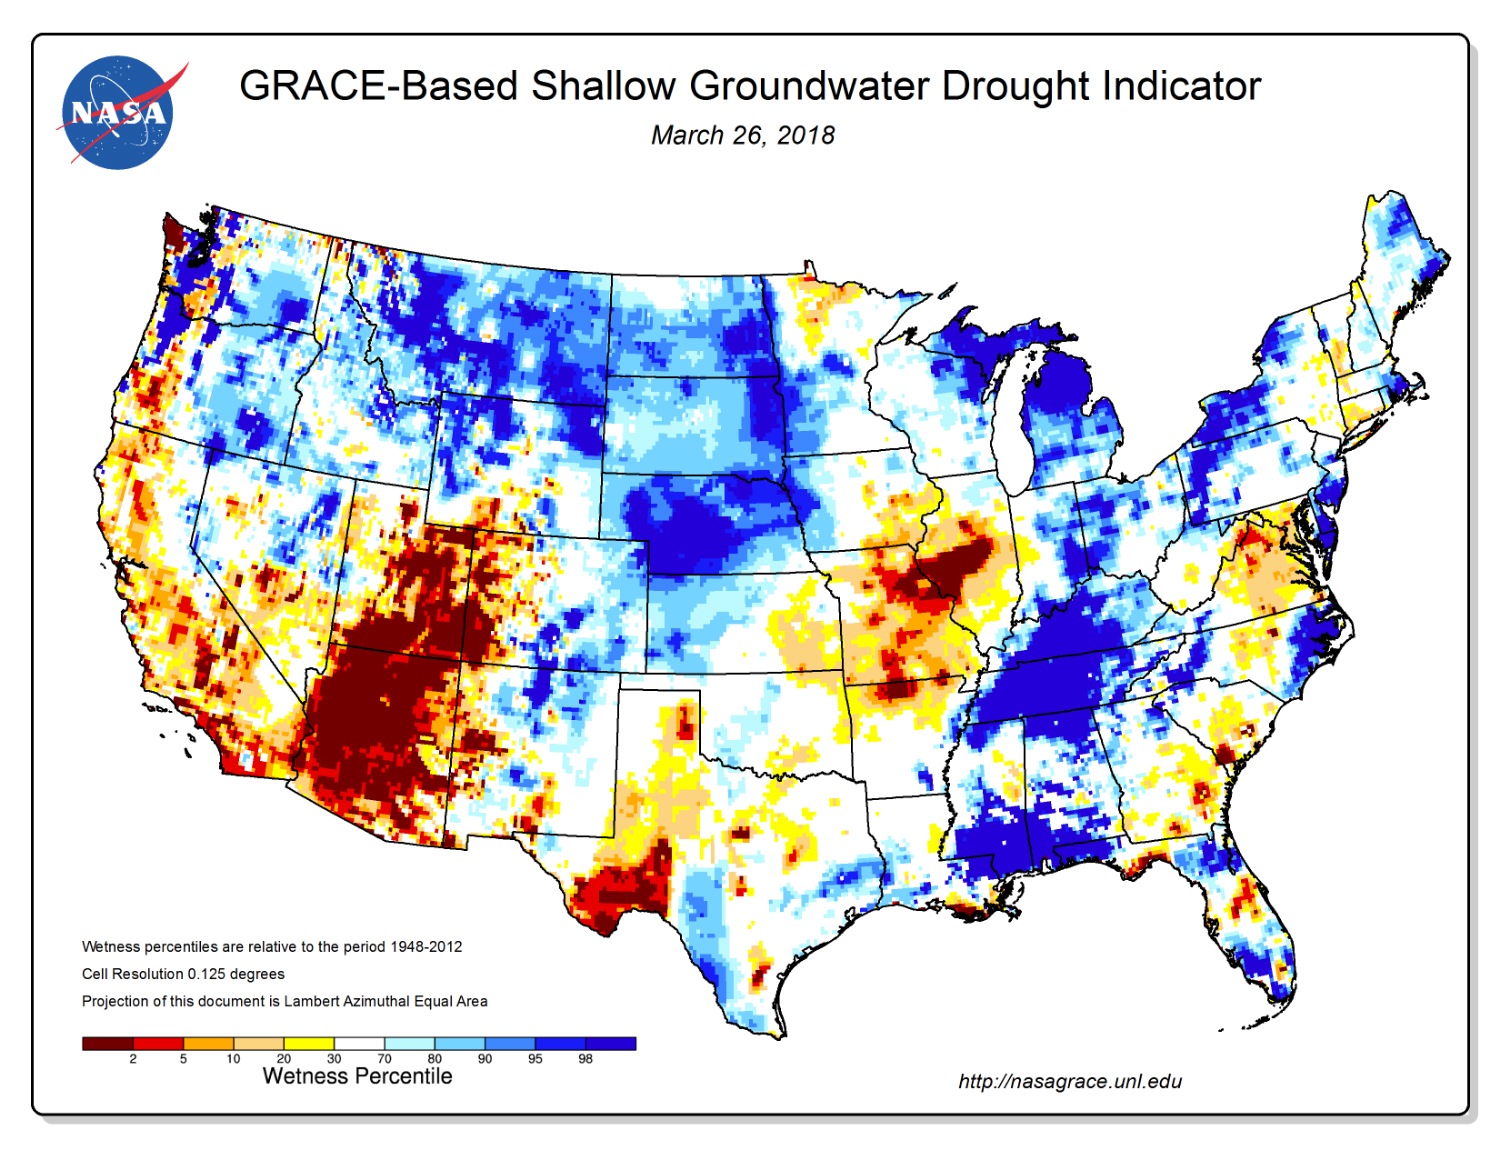 While the GRACE mission was active, scientists at NASA’s Goddard Space Flight Center generated groundwater and soil moisture drought indicators like this every week from GRACE data on terrestrial water storage and other observations, using a numerical model of land surface water and energy processes.